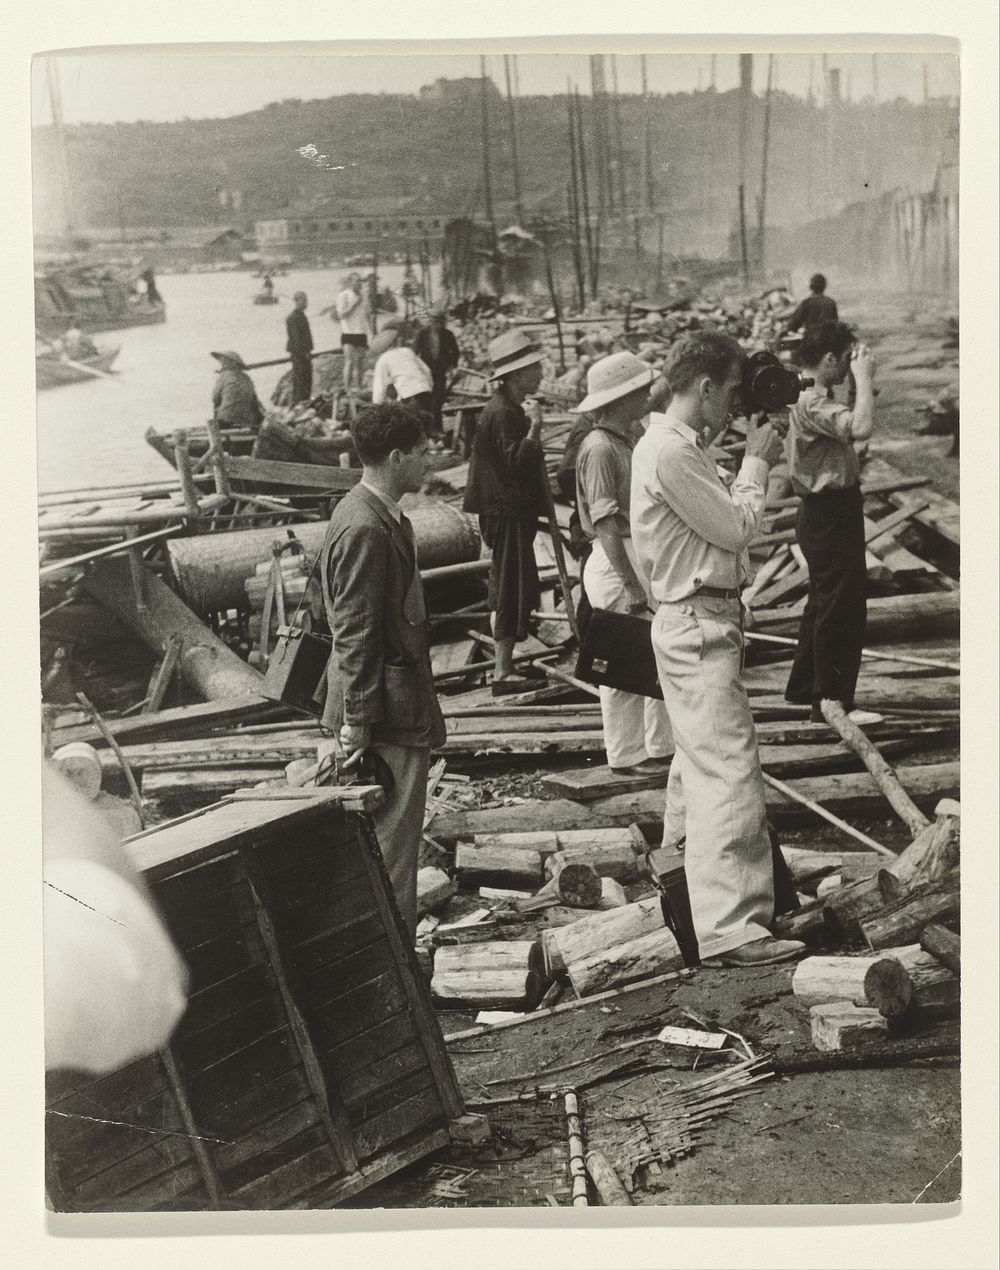 Joris Ivens, John Fernhout and Robert Capa at Work in the Bombed City of Hankow (1938) by anonymous